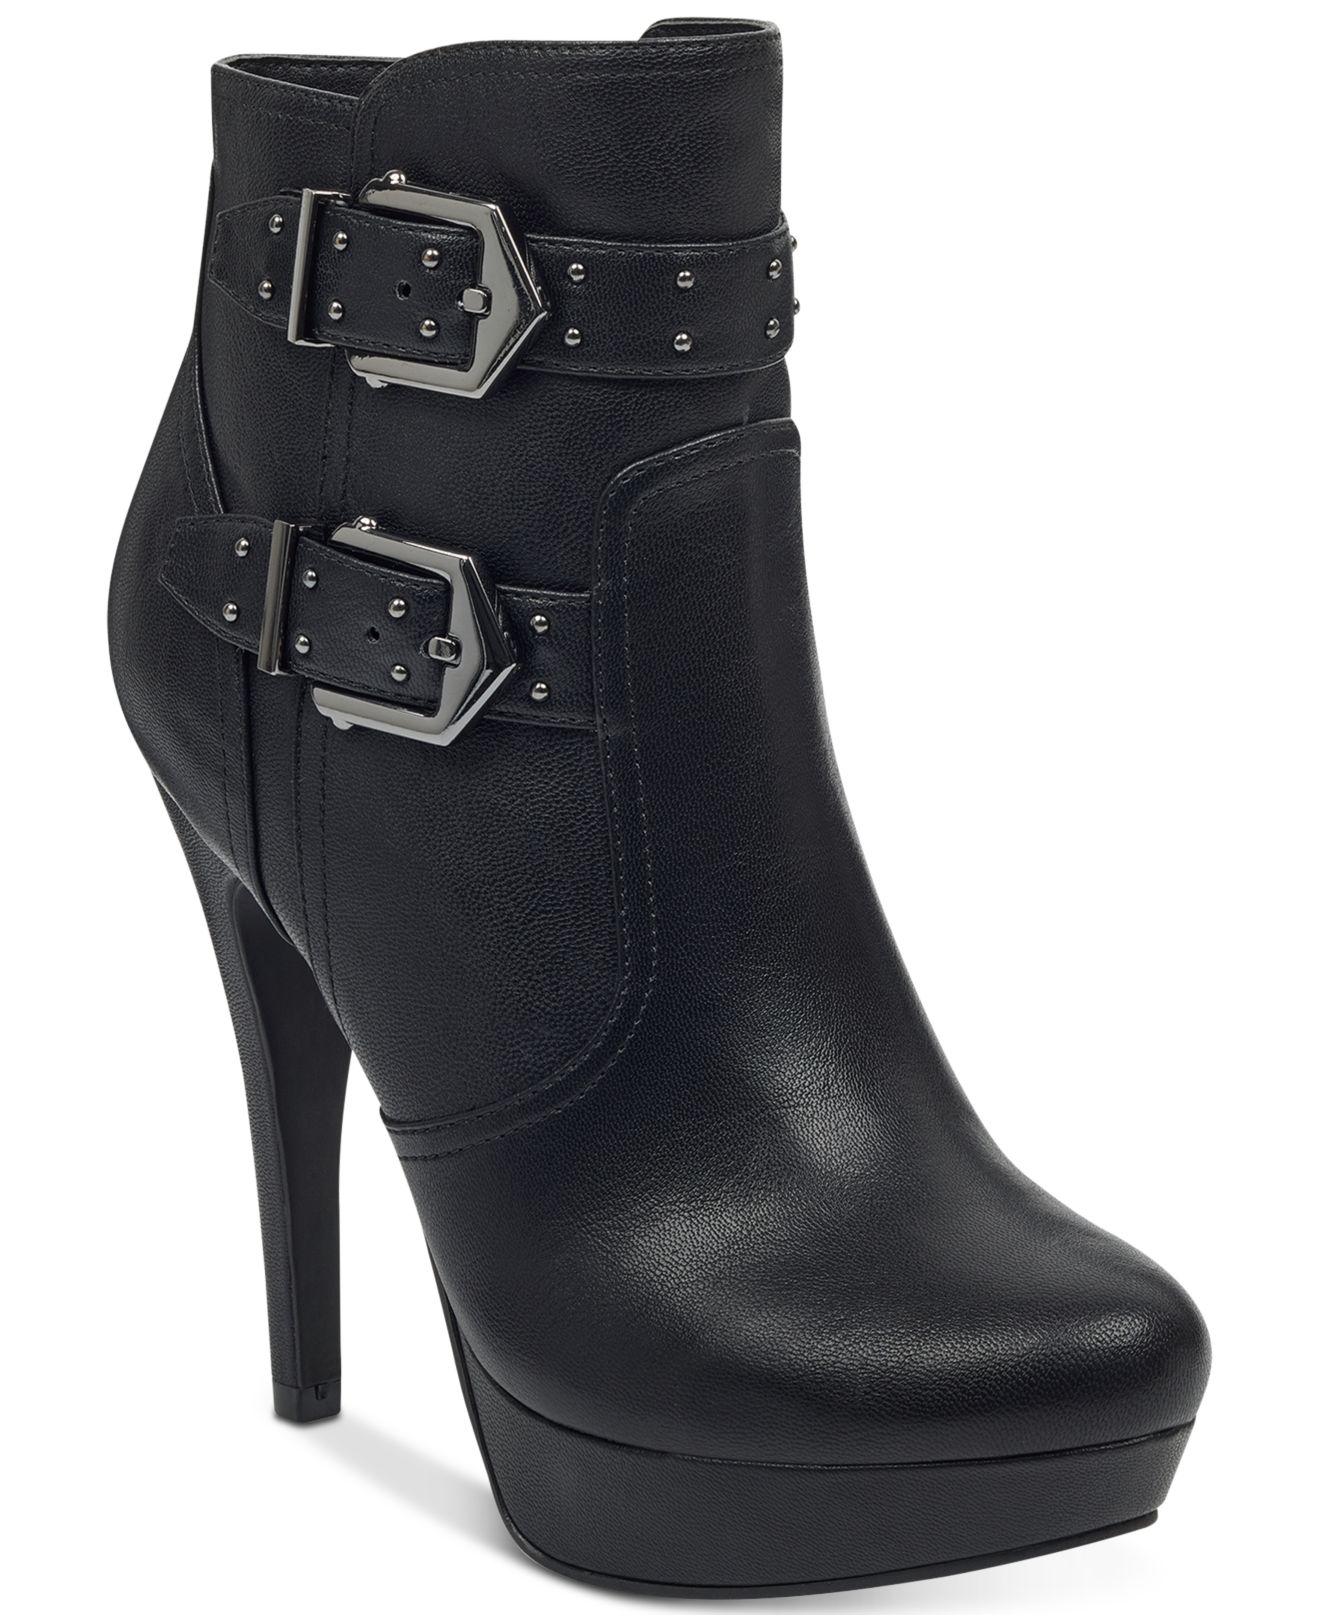 G by Guess Womens Dalli2 Almond Toe Ankle Fashion Boots, Black, Size 9. ...